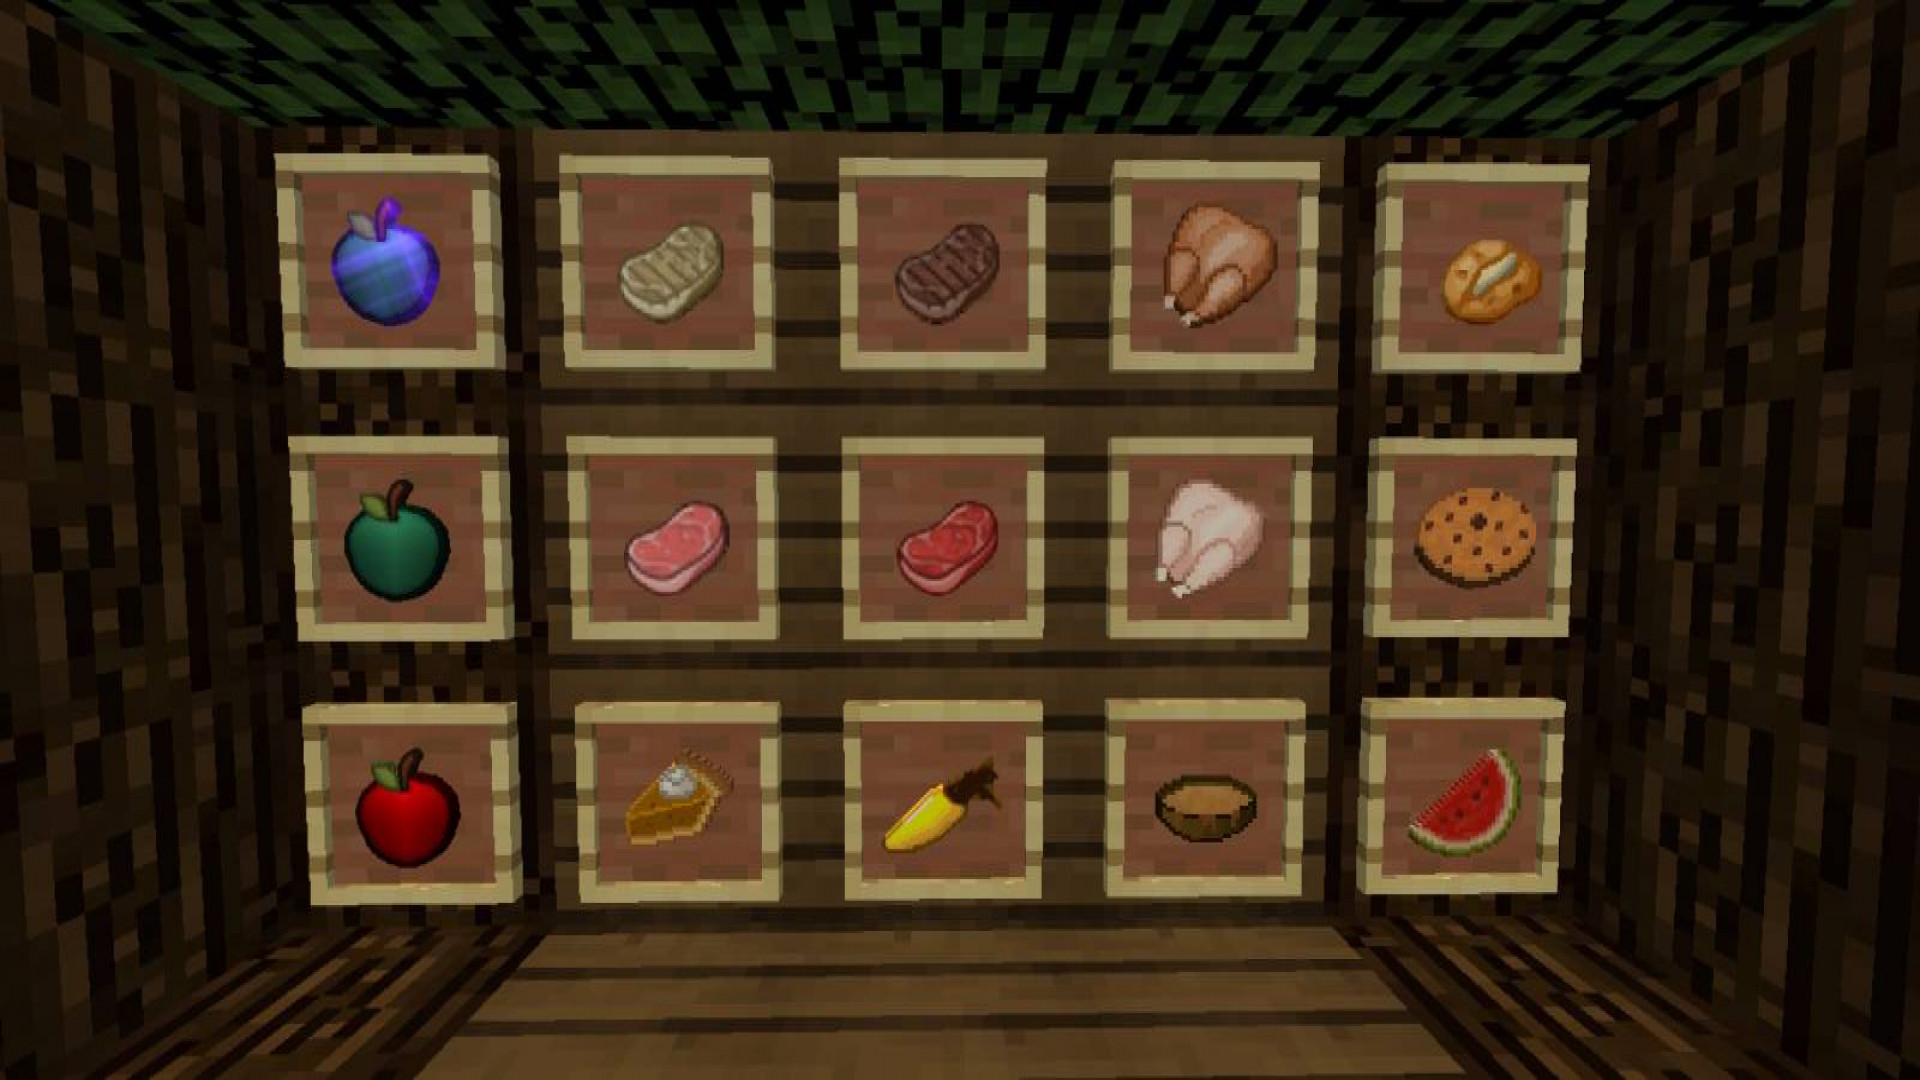 Resource Pack Pvp Texture Pack,Ruby Uhc Pack By Dimex Minecraft Resource Pa...